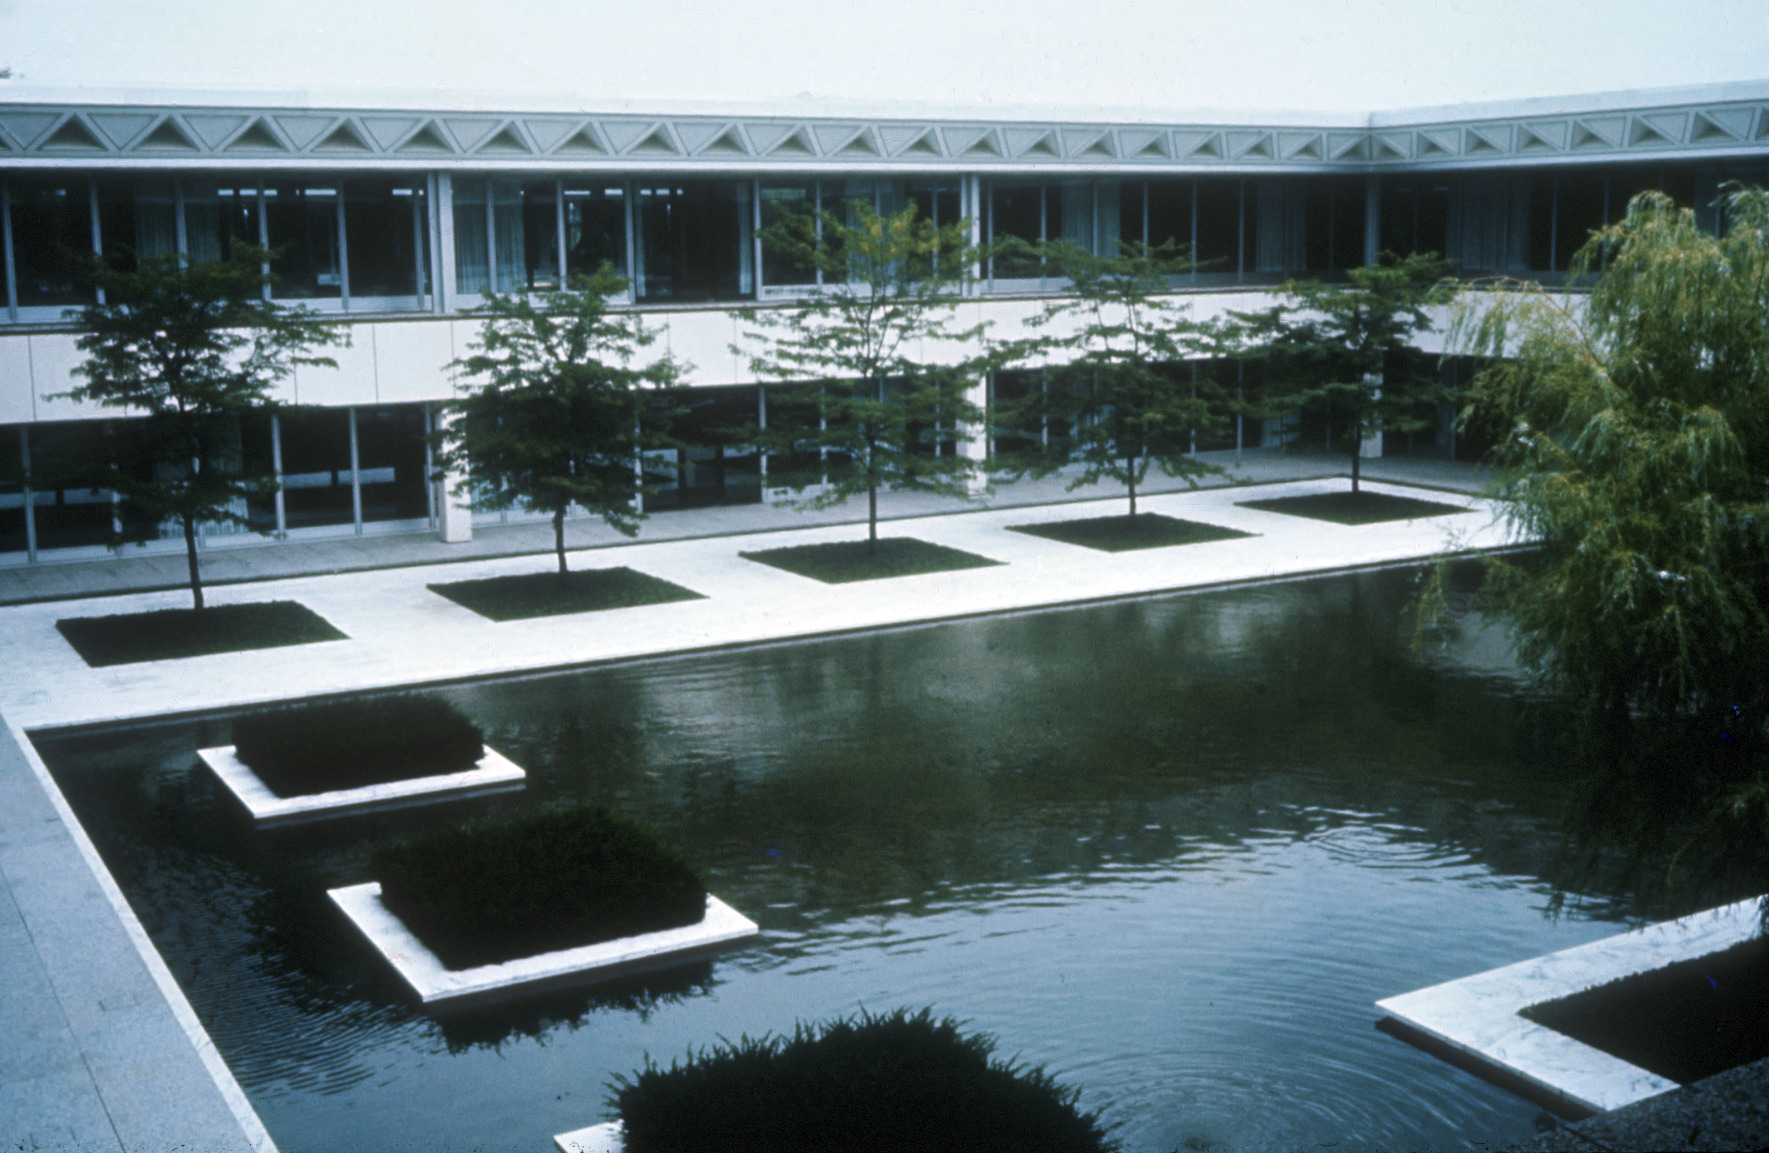 photograph of reflecting pool in courtyard enclosed by two-story office buildings and featuring floating planters